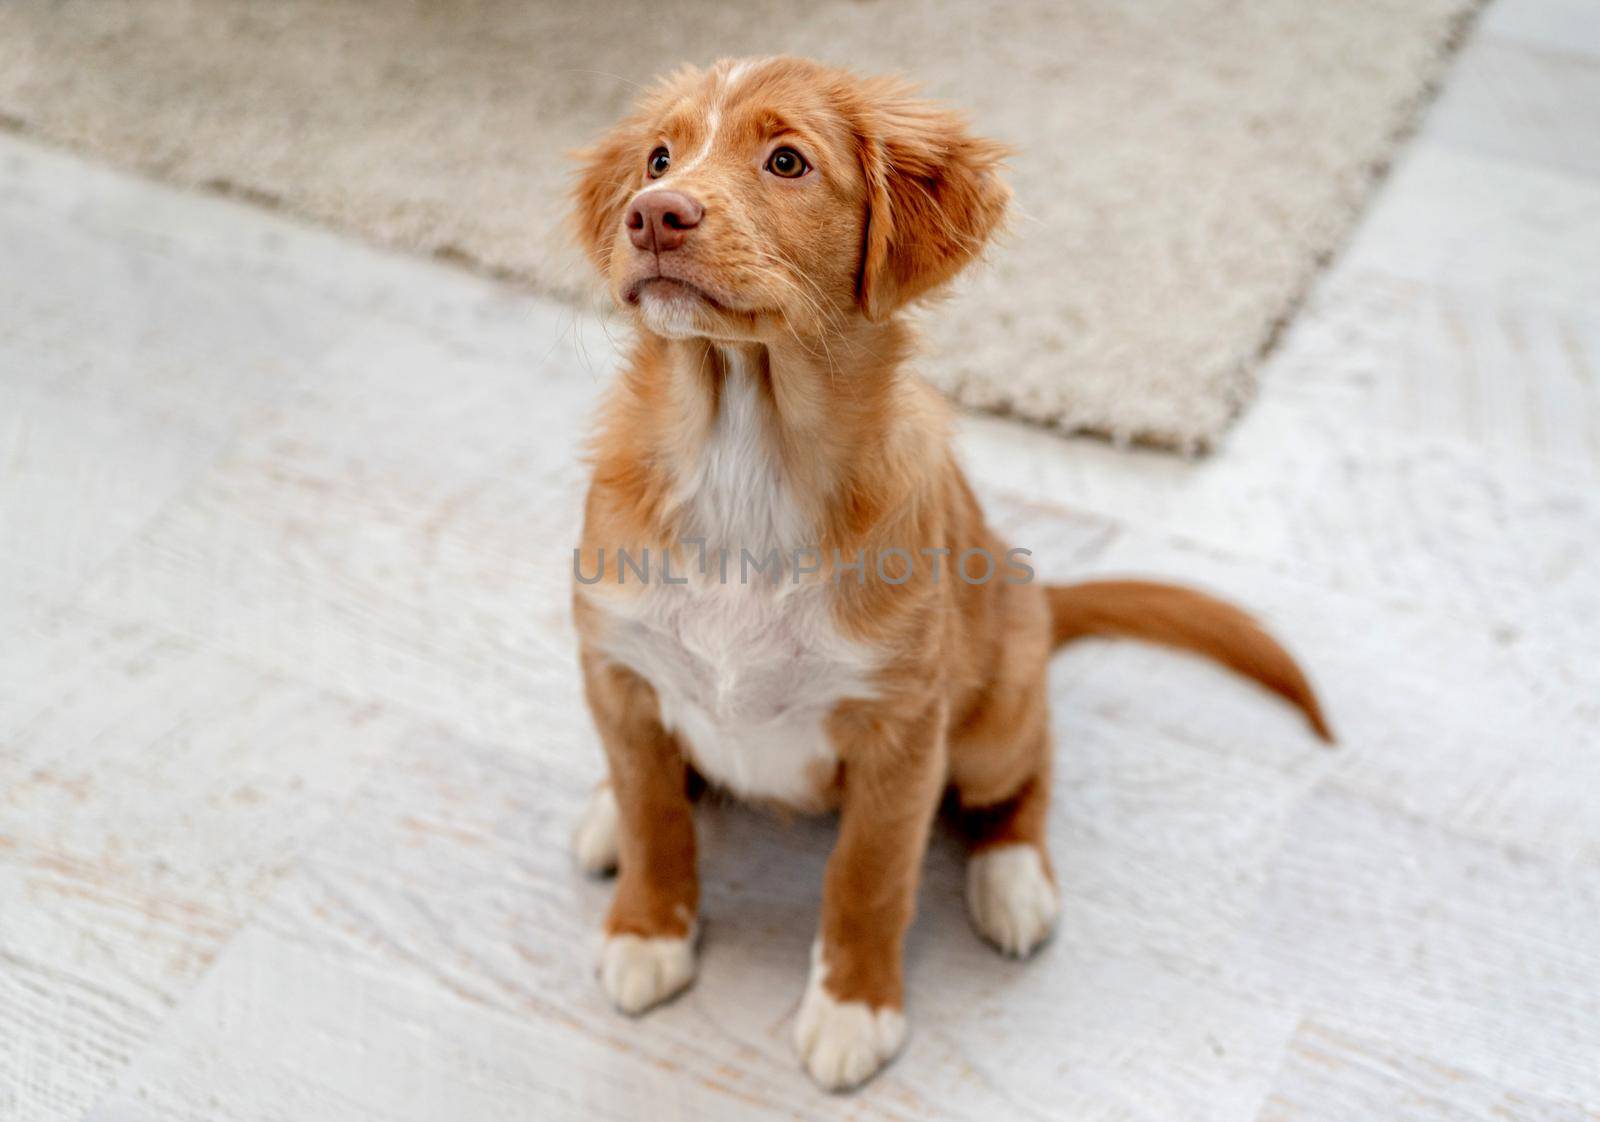 Toller puppy having fun at home by tan4ikk1